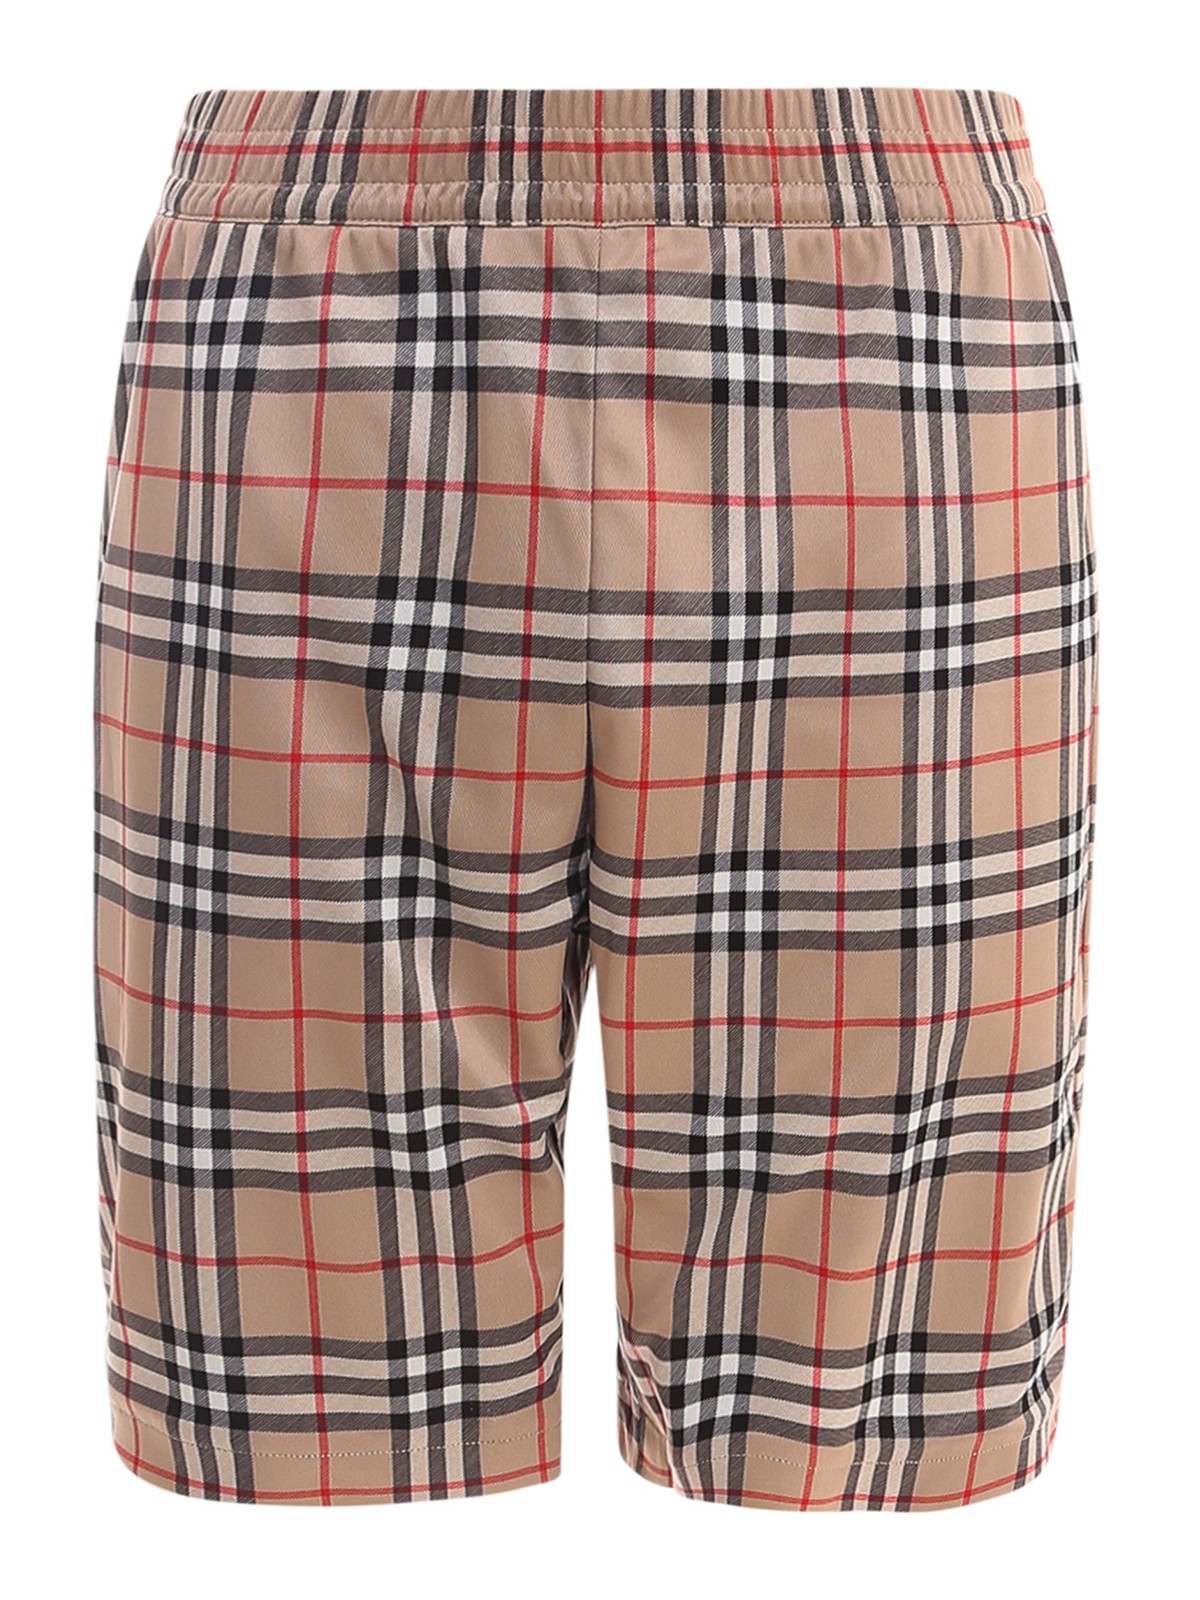 Latest Burberry Joggers & Track Pants arrivals - Boys - 5 products |  FASHIOLA.in